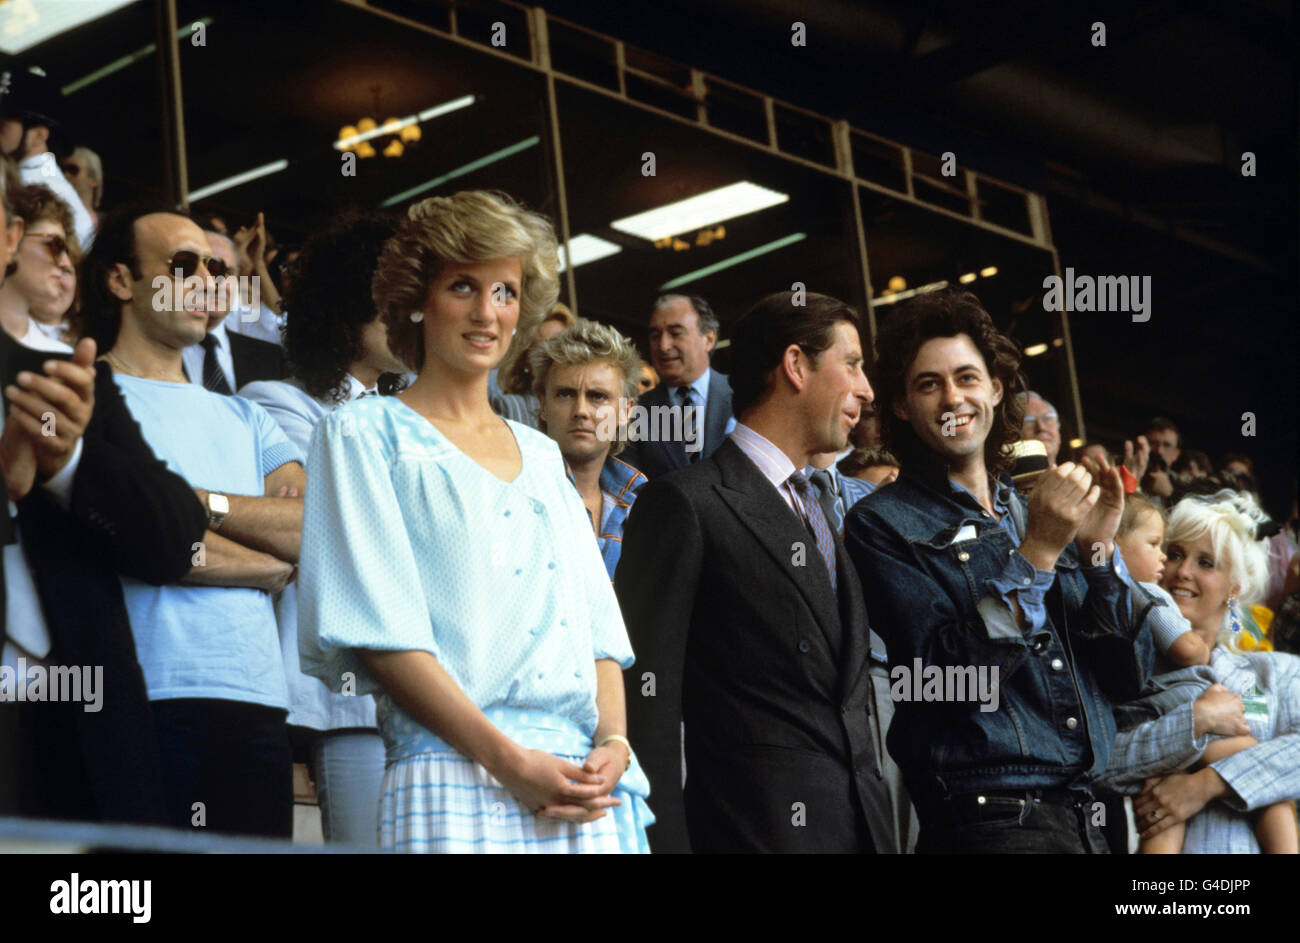 L-R: The Princess of Wales, the Prince of Wales and Sir Bob Geldof, organiser of the Live Aid music concert, which raised millions of pounds for famine relief and his former wife, the late Paula Yates (far right), at Wembley Stadium, London. Stock Photo